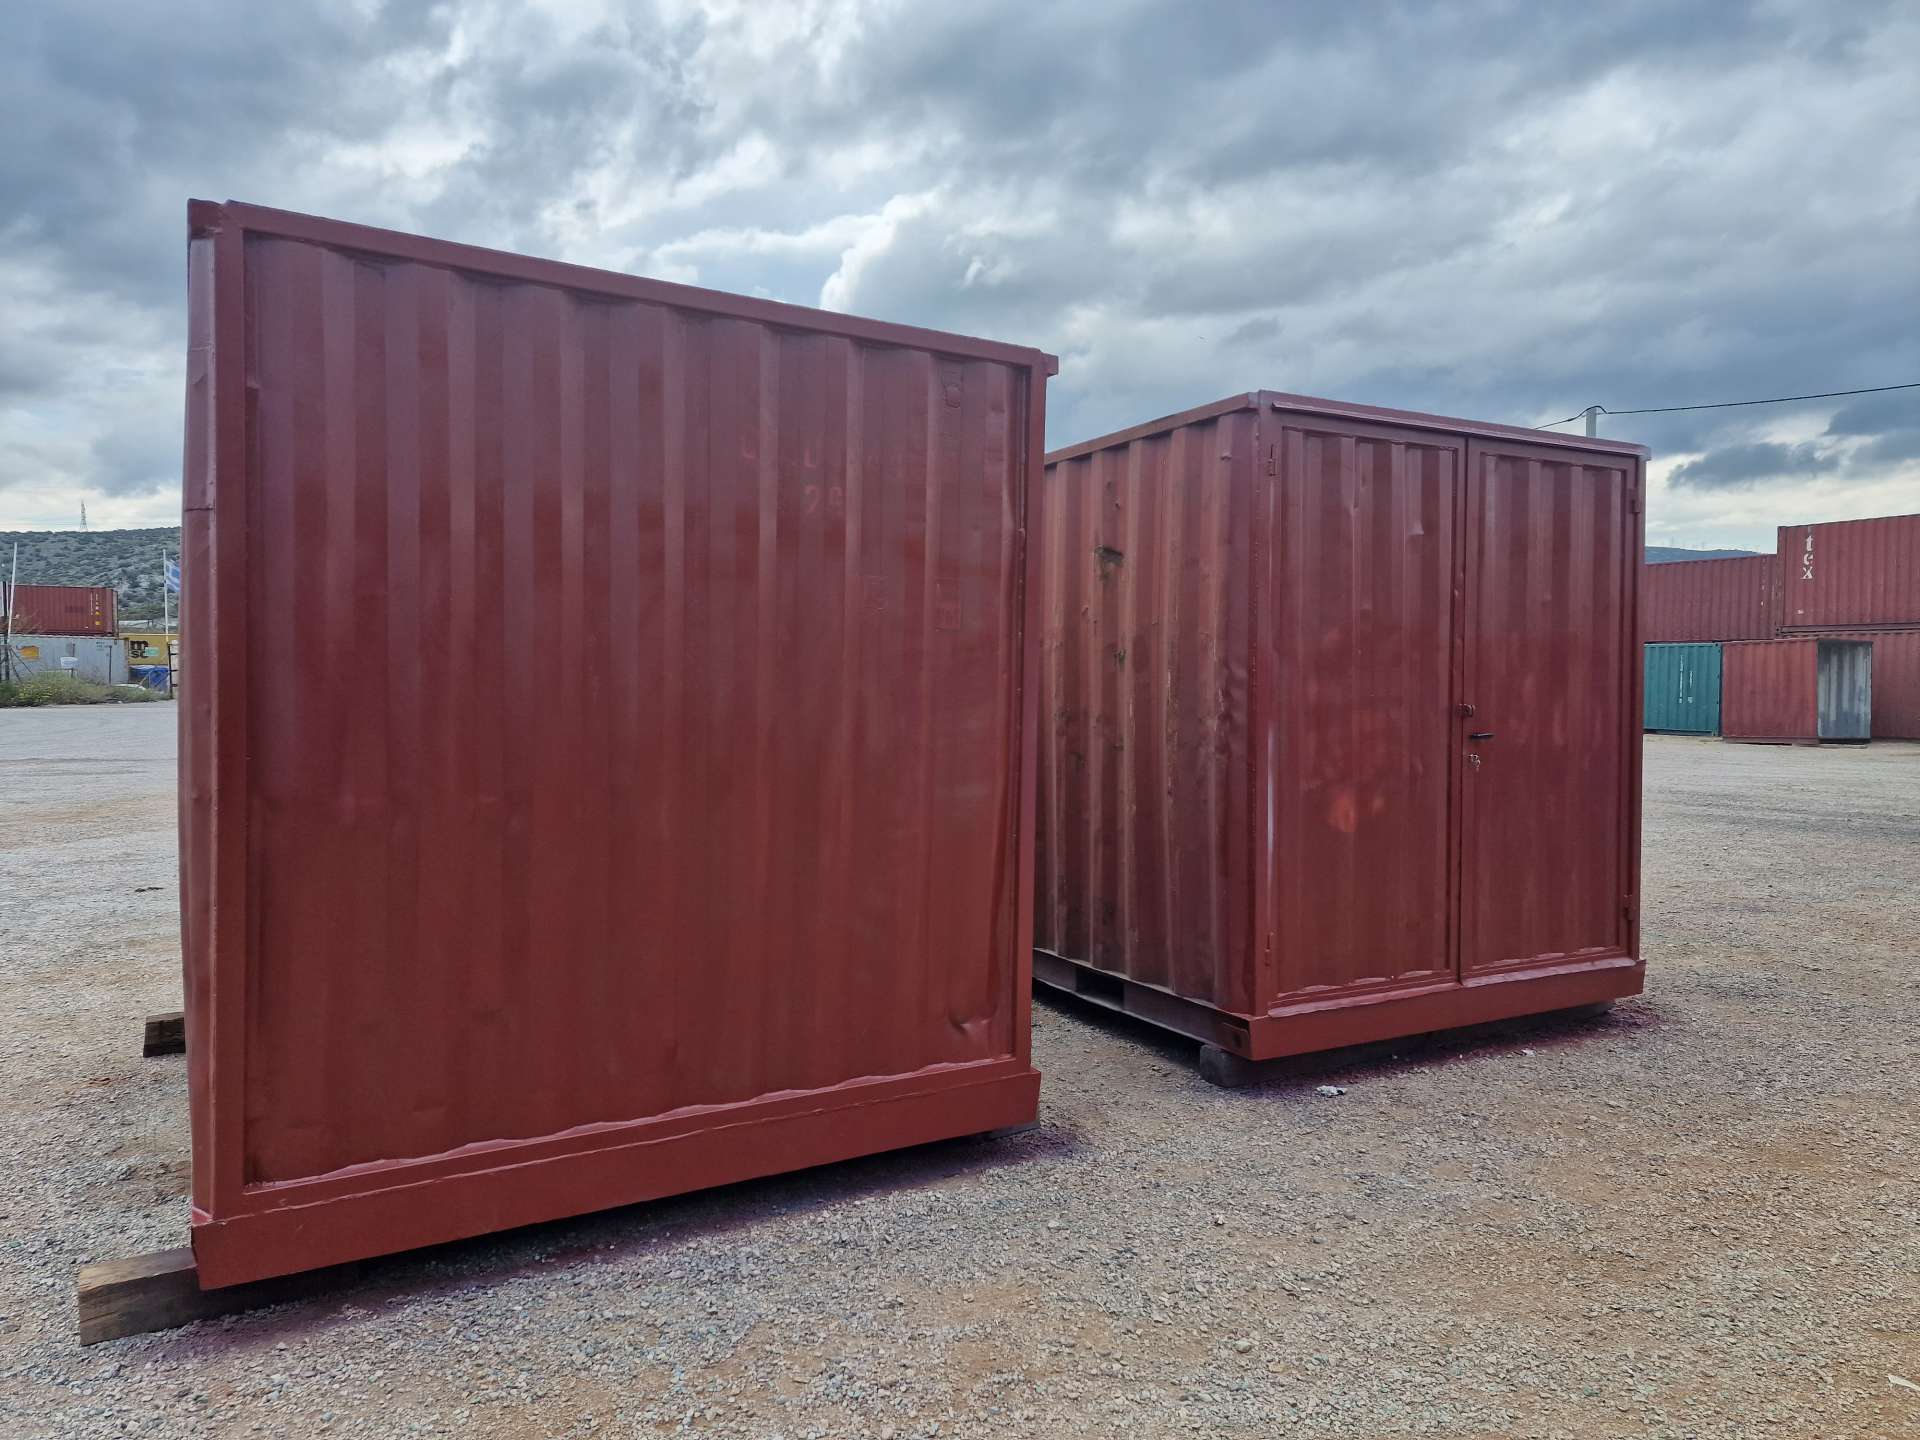 Creating 2 customized storage solutions by cutting 20ft container  to two pieces